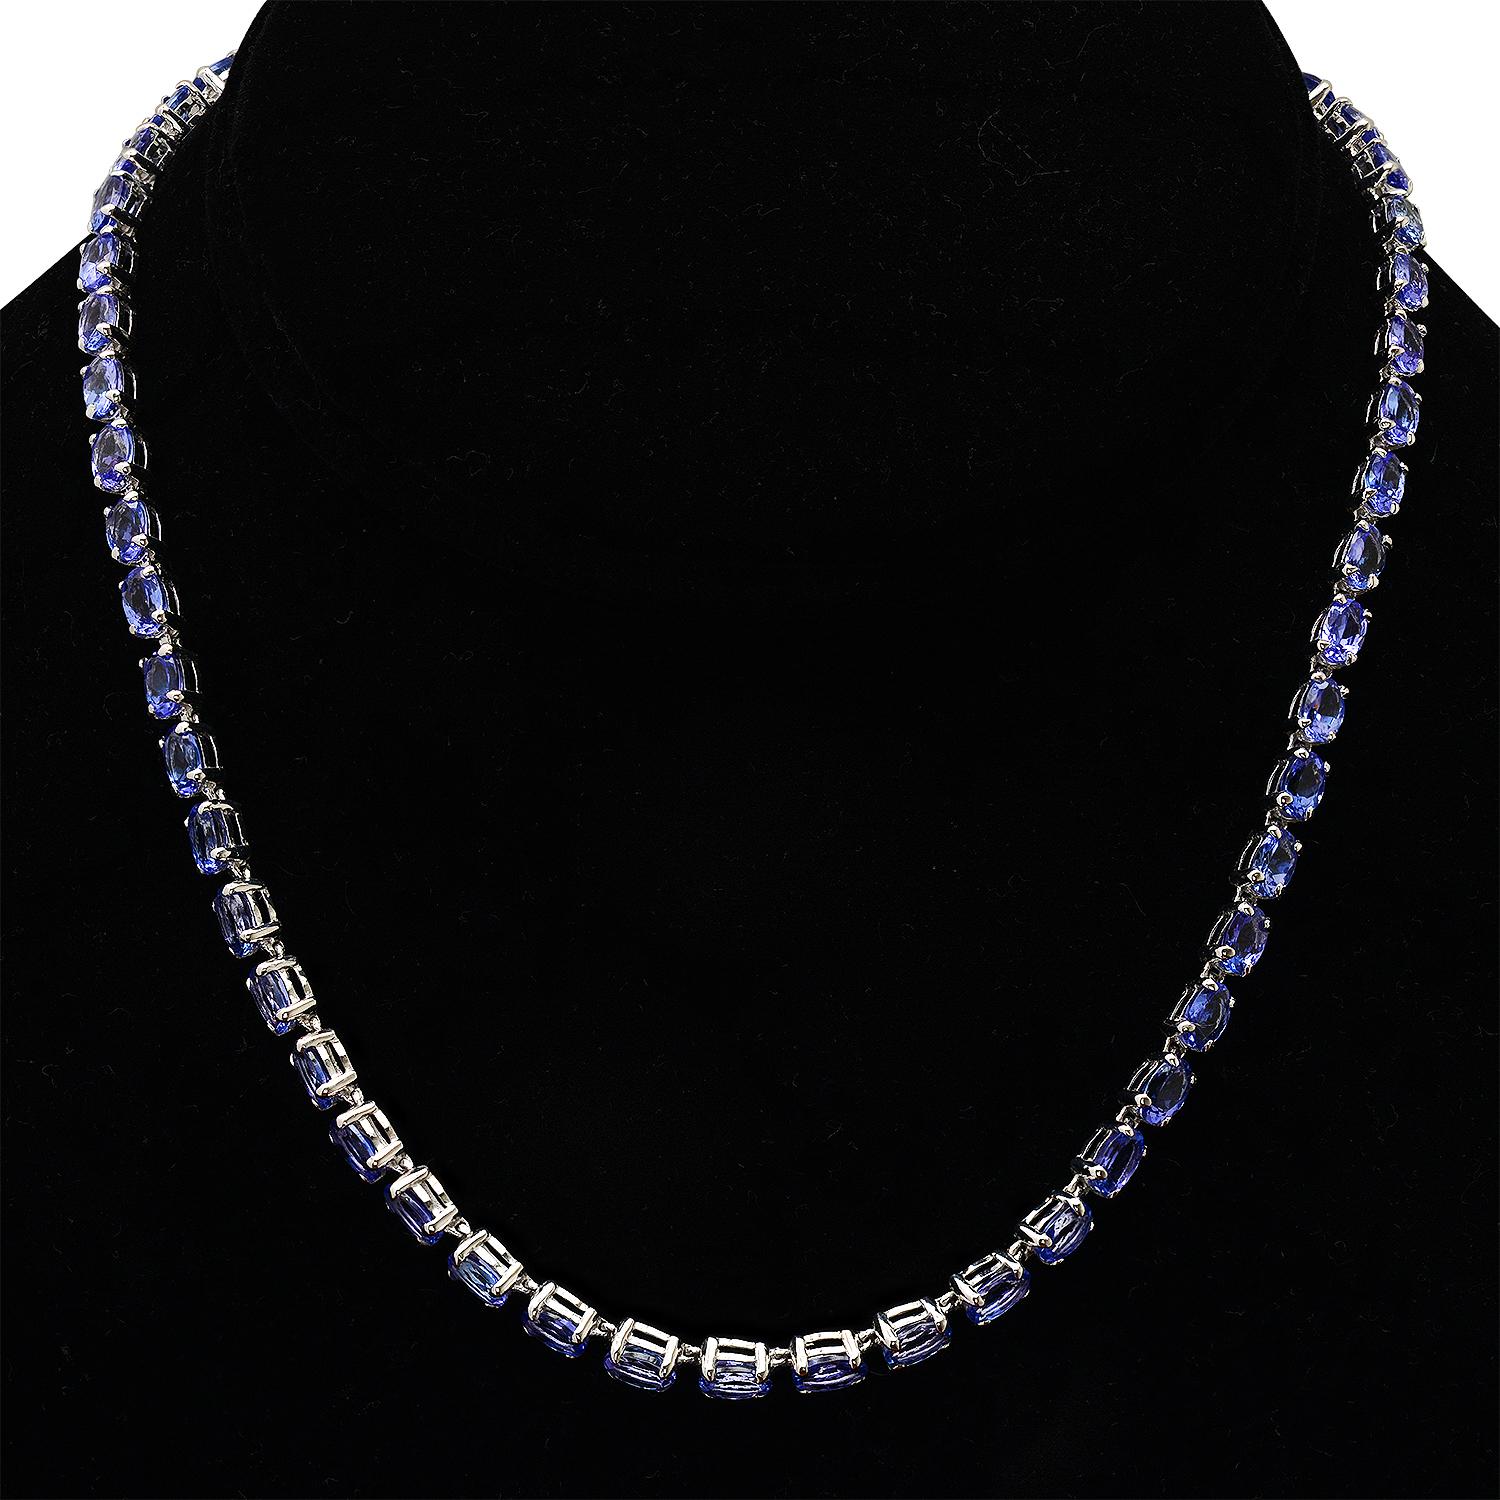 14K White Gold with 40.0ct Tanzanite Necklace